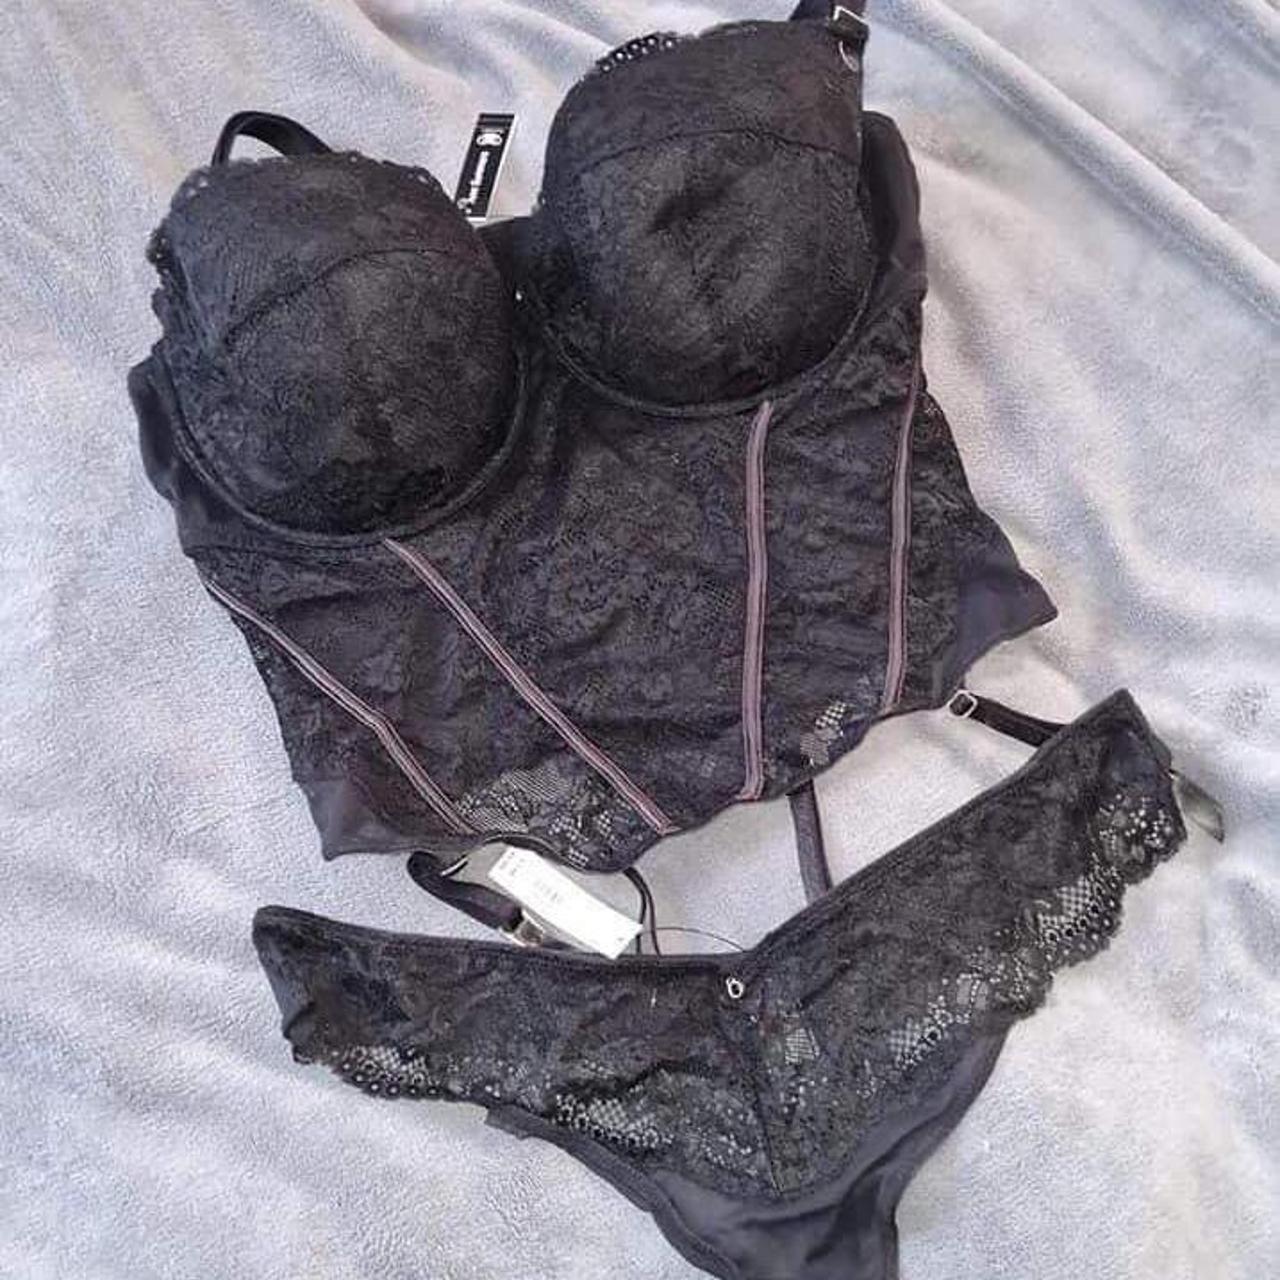 🔥🔥🔥 SALE - Ann Summers 🛍🔥, MESSAGE ME FOR THE LINK